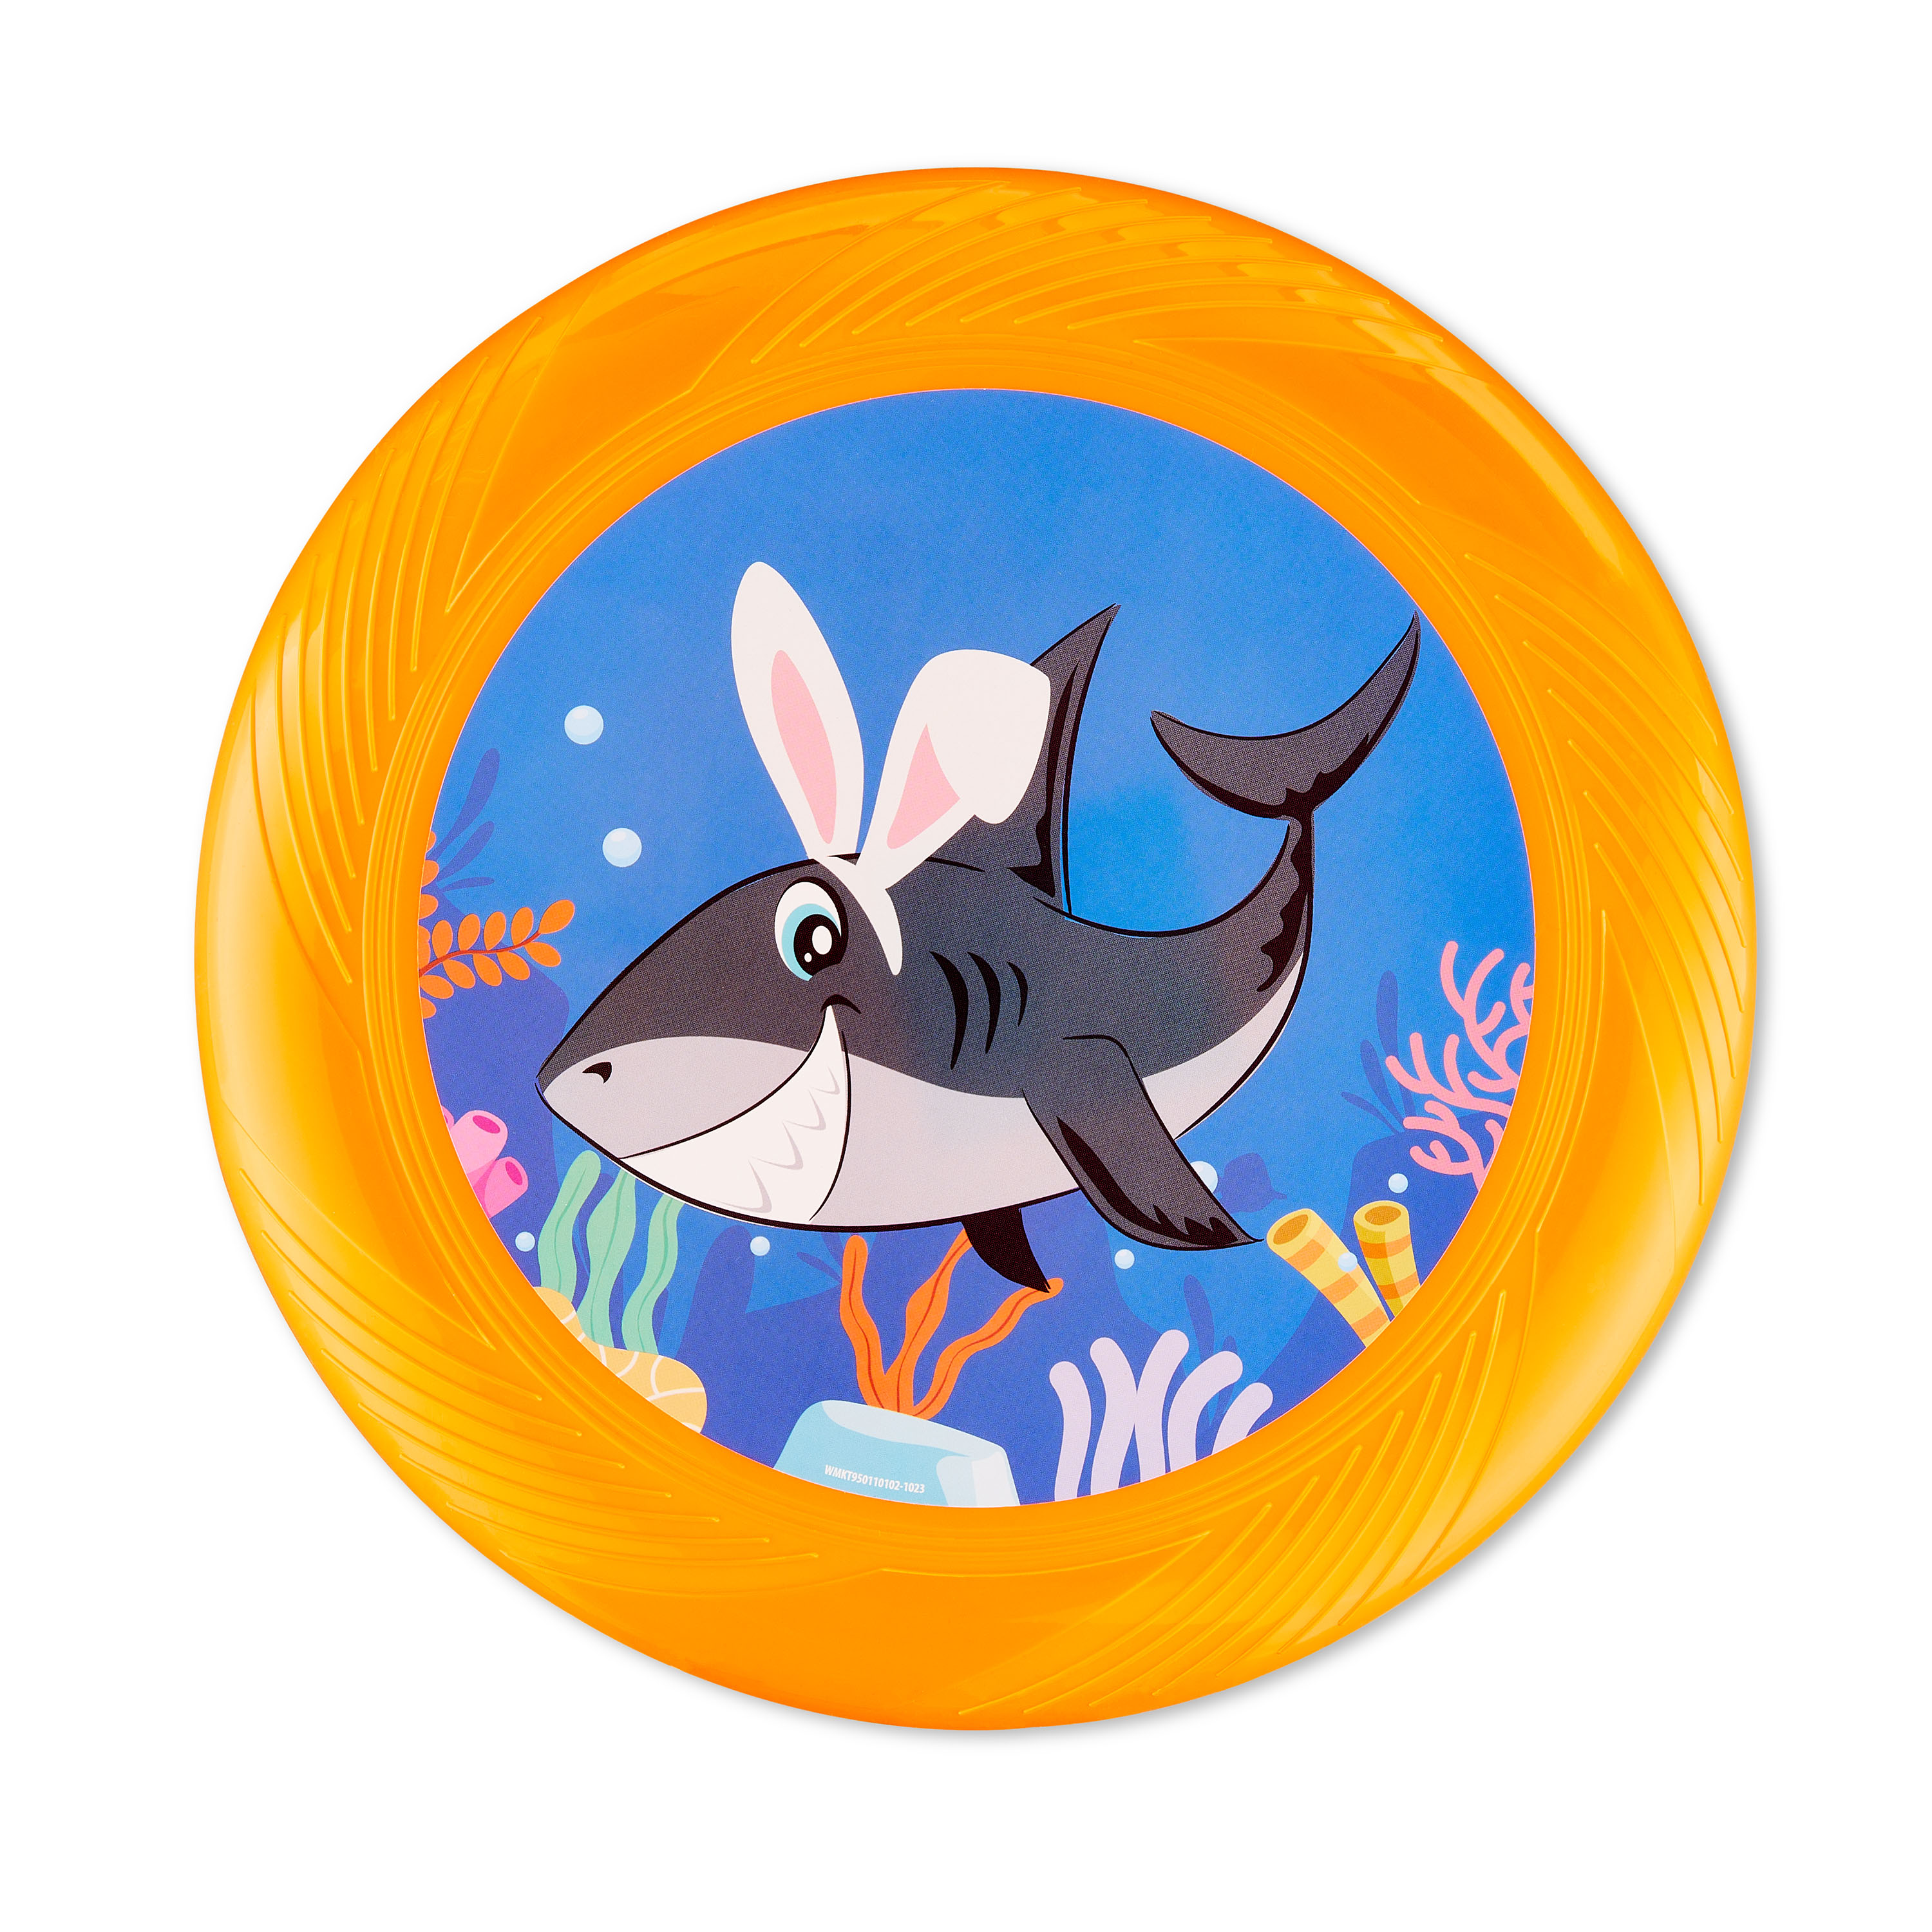 Easter Orange Shark Flying Disc, by Way To Celebrate - image 1 of 6